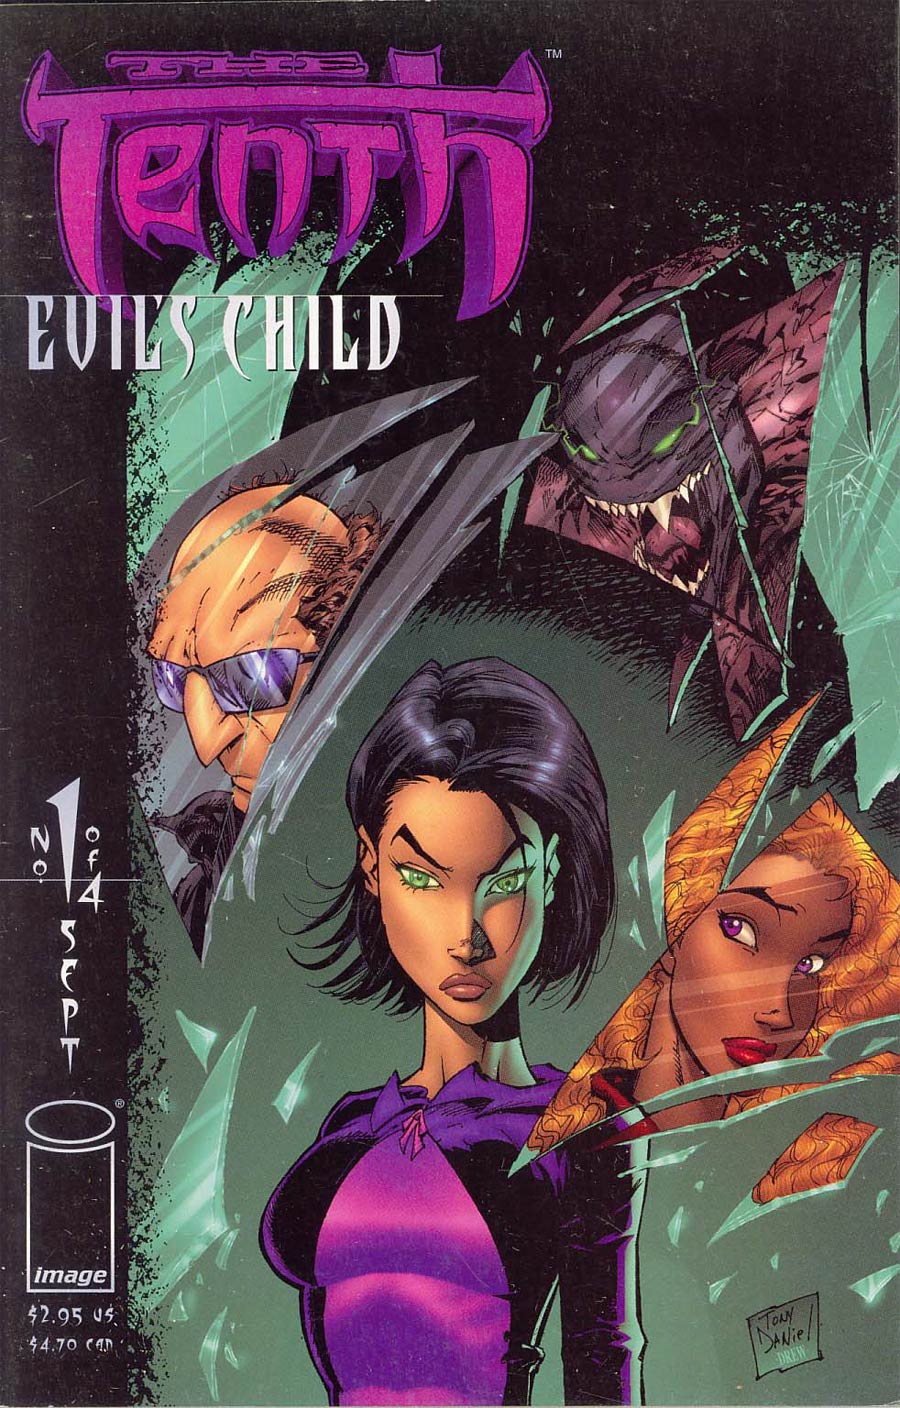 Tenth Vol 4 #1 Cover A Evils Child